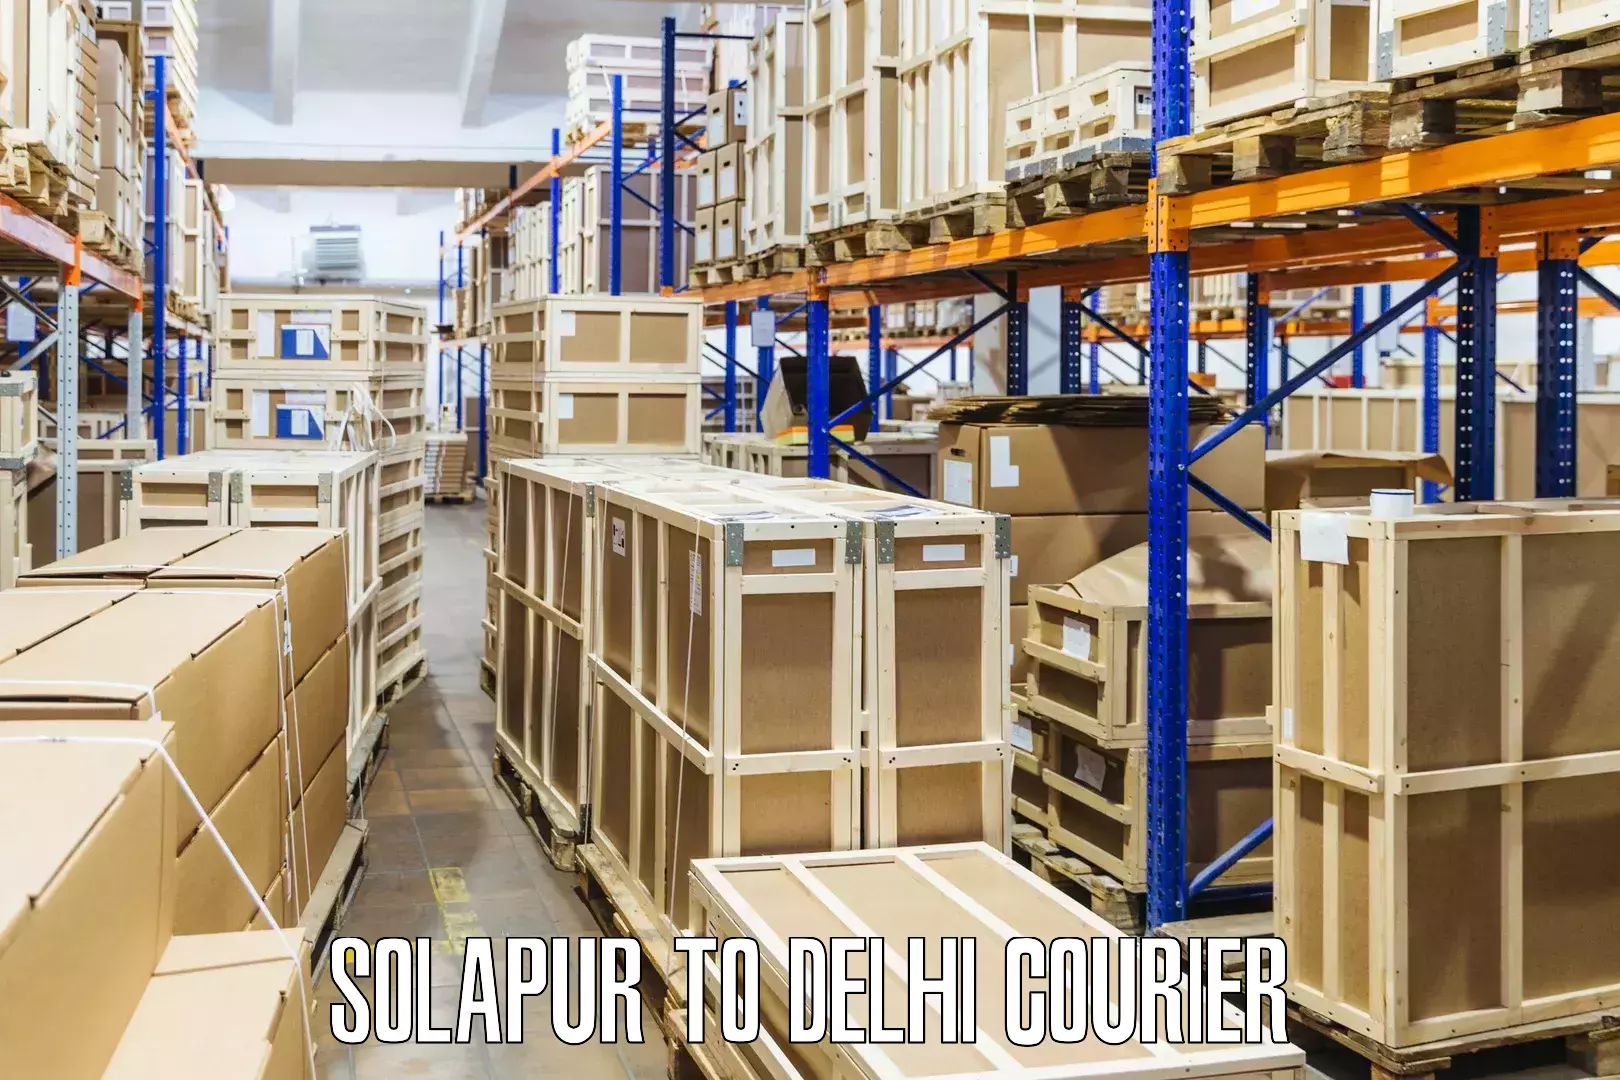 Comprehensive shipping network Solapur to Lodhi Road